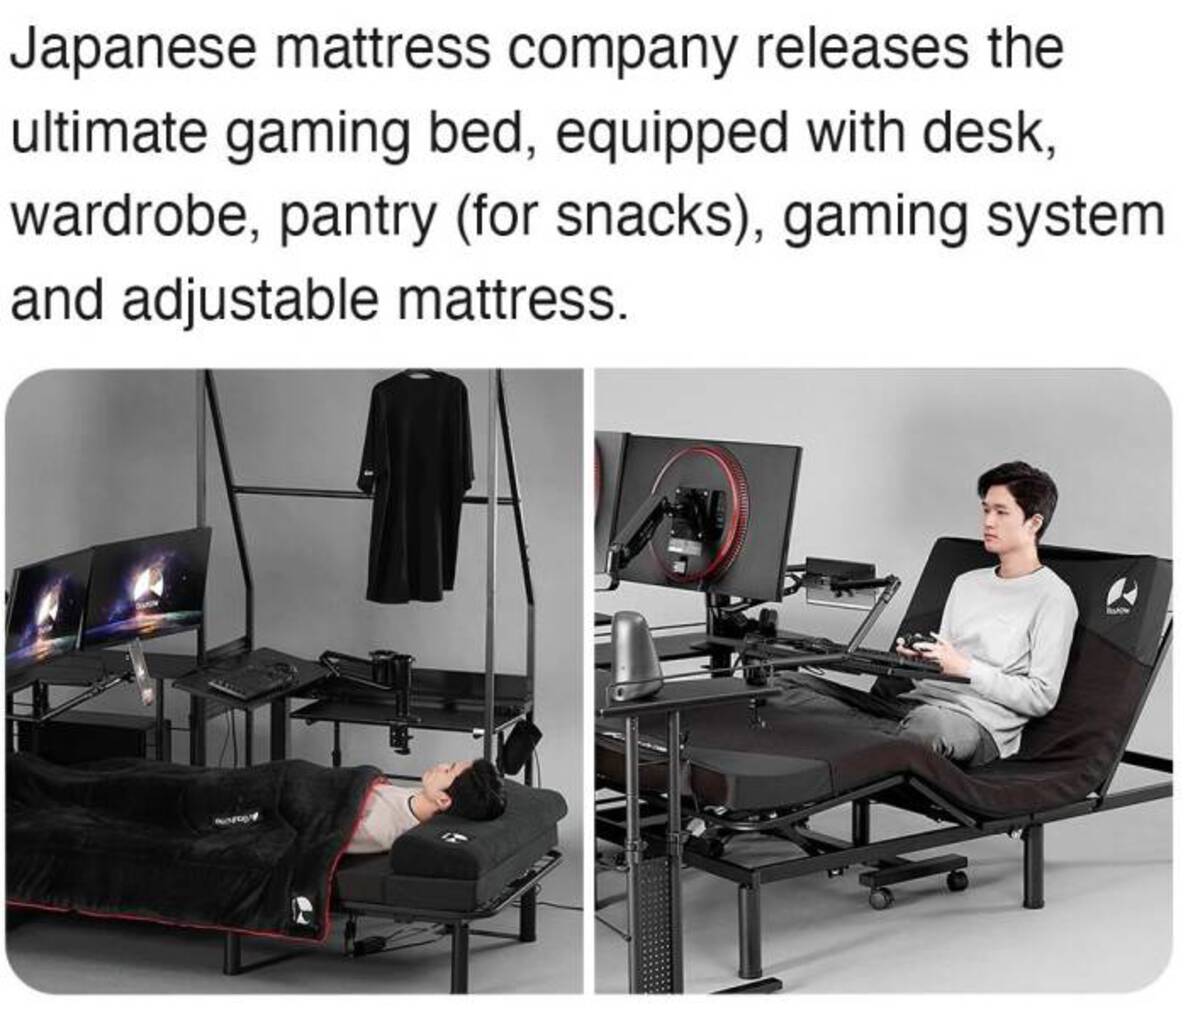 Furniture - Japanese mattress company releases the ultimate gaming bed, equipped with desk, wardrobe, pantry for snacks, gaming system and adjustable mattress.